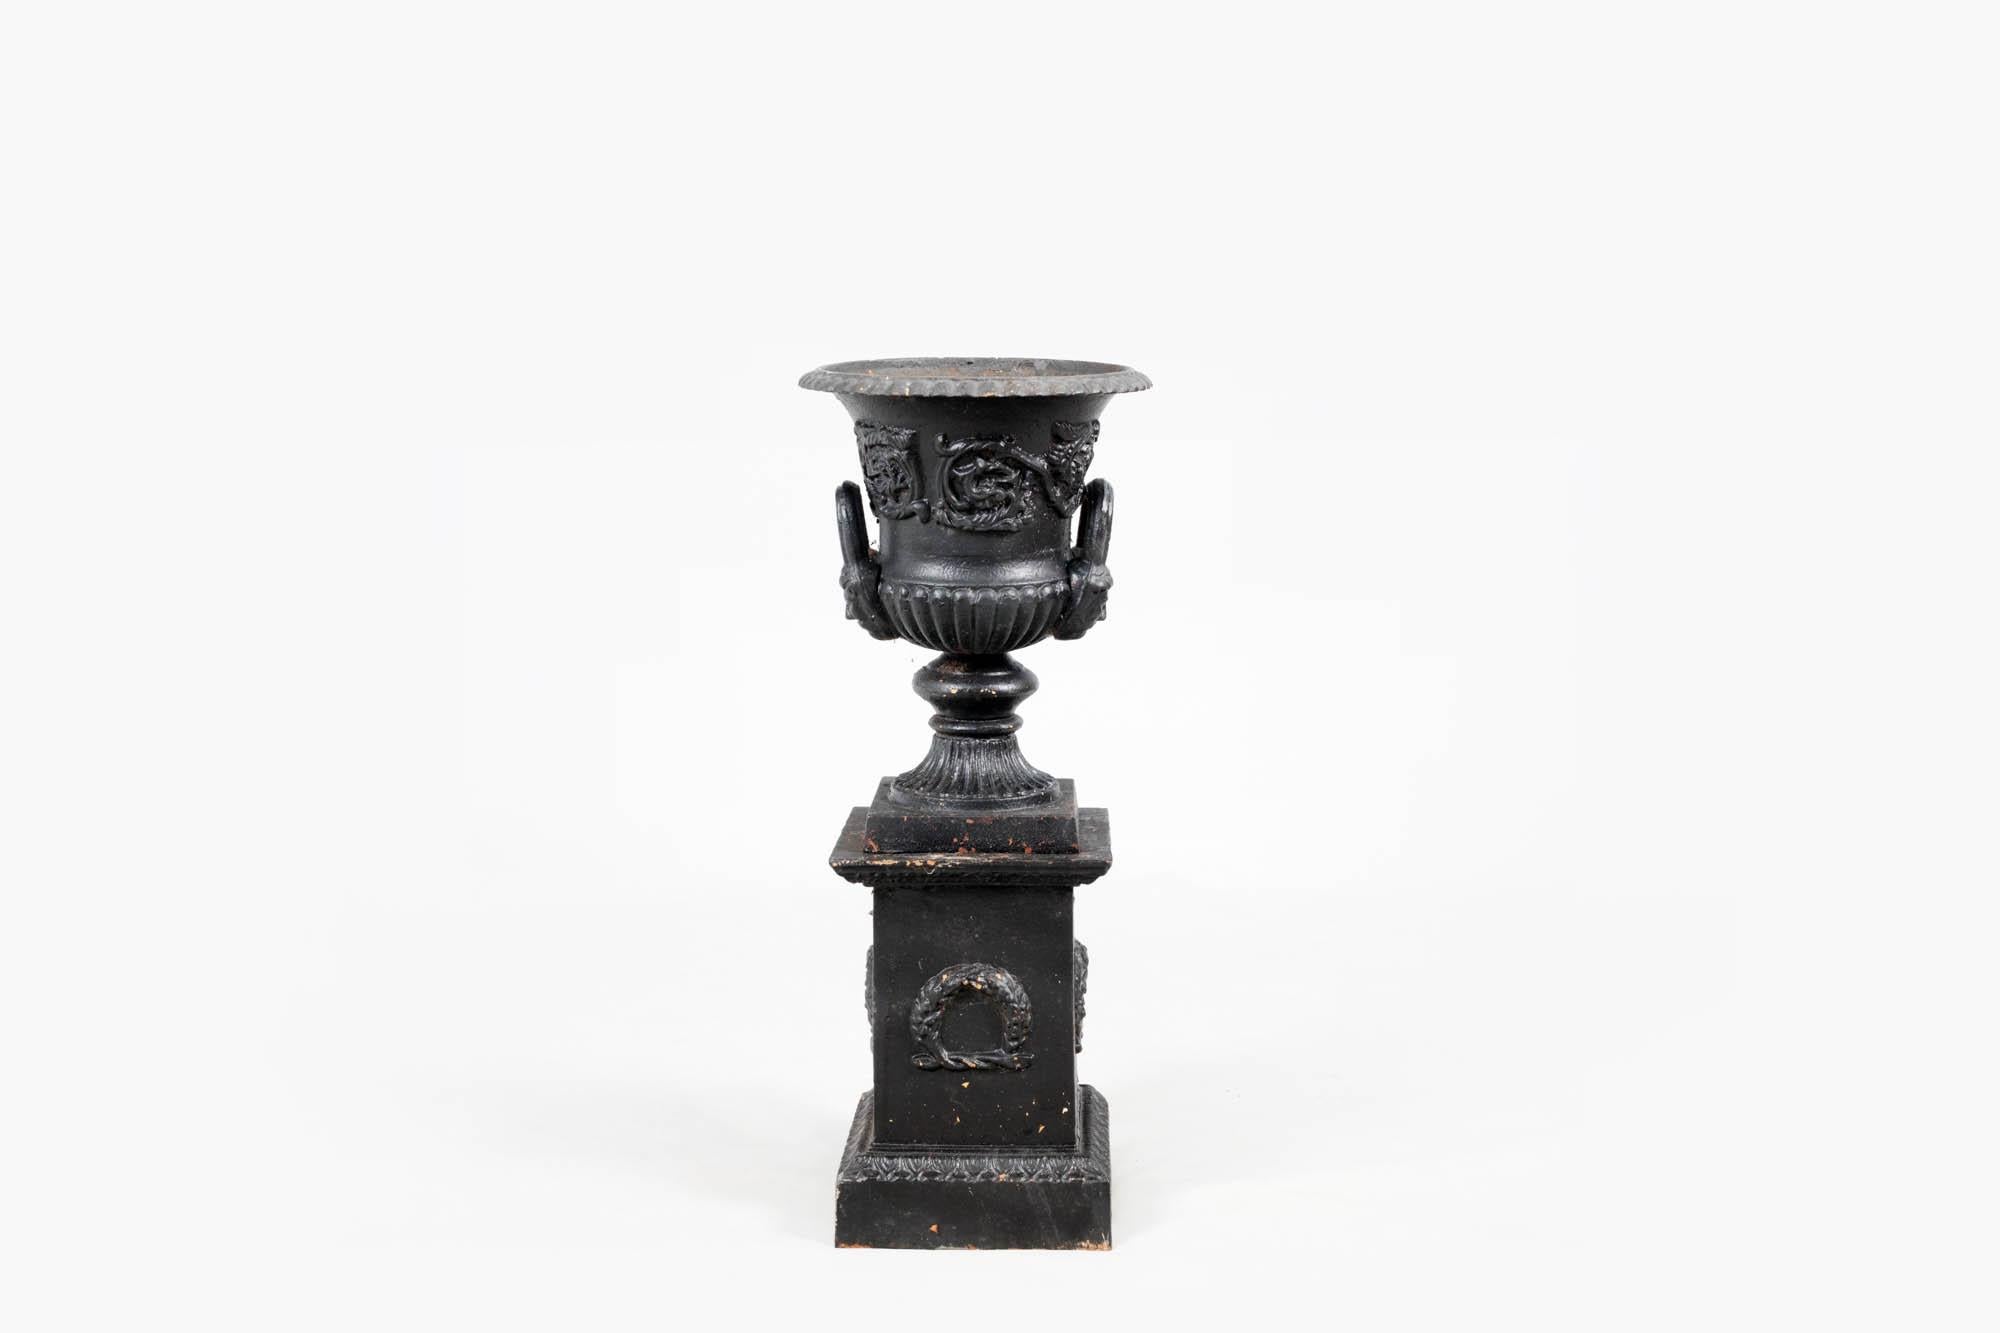 Pair 19th century Regency era cast iron Campana-shaped petite garden urns. The pair feature Classical style design with dentil detailed rims, decorative foliate relief to the bodies, and flared masked handles on reeded round bases. Each urn sits on